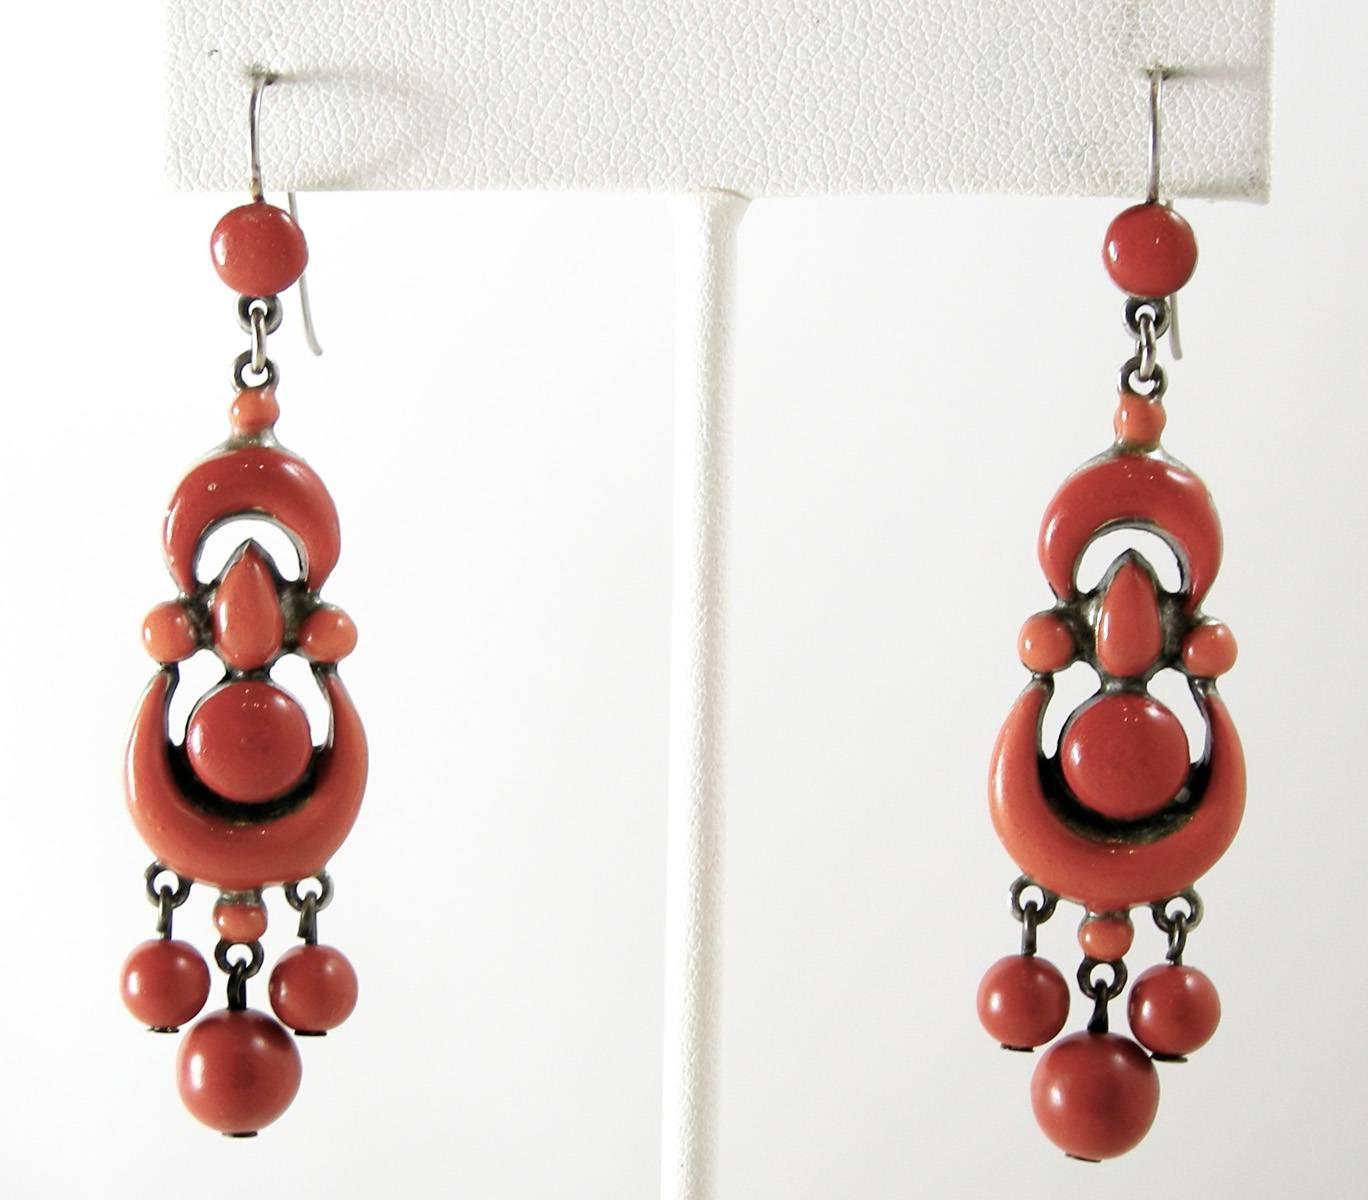 These RARE Victorian earrings are stunning. They are made with beautiful red coral enamel. In excellent condition, they measure 2  2/8”x 2/8: and have a silver tone setting.